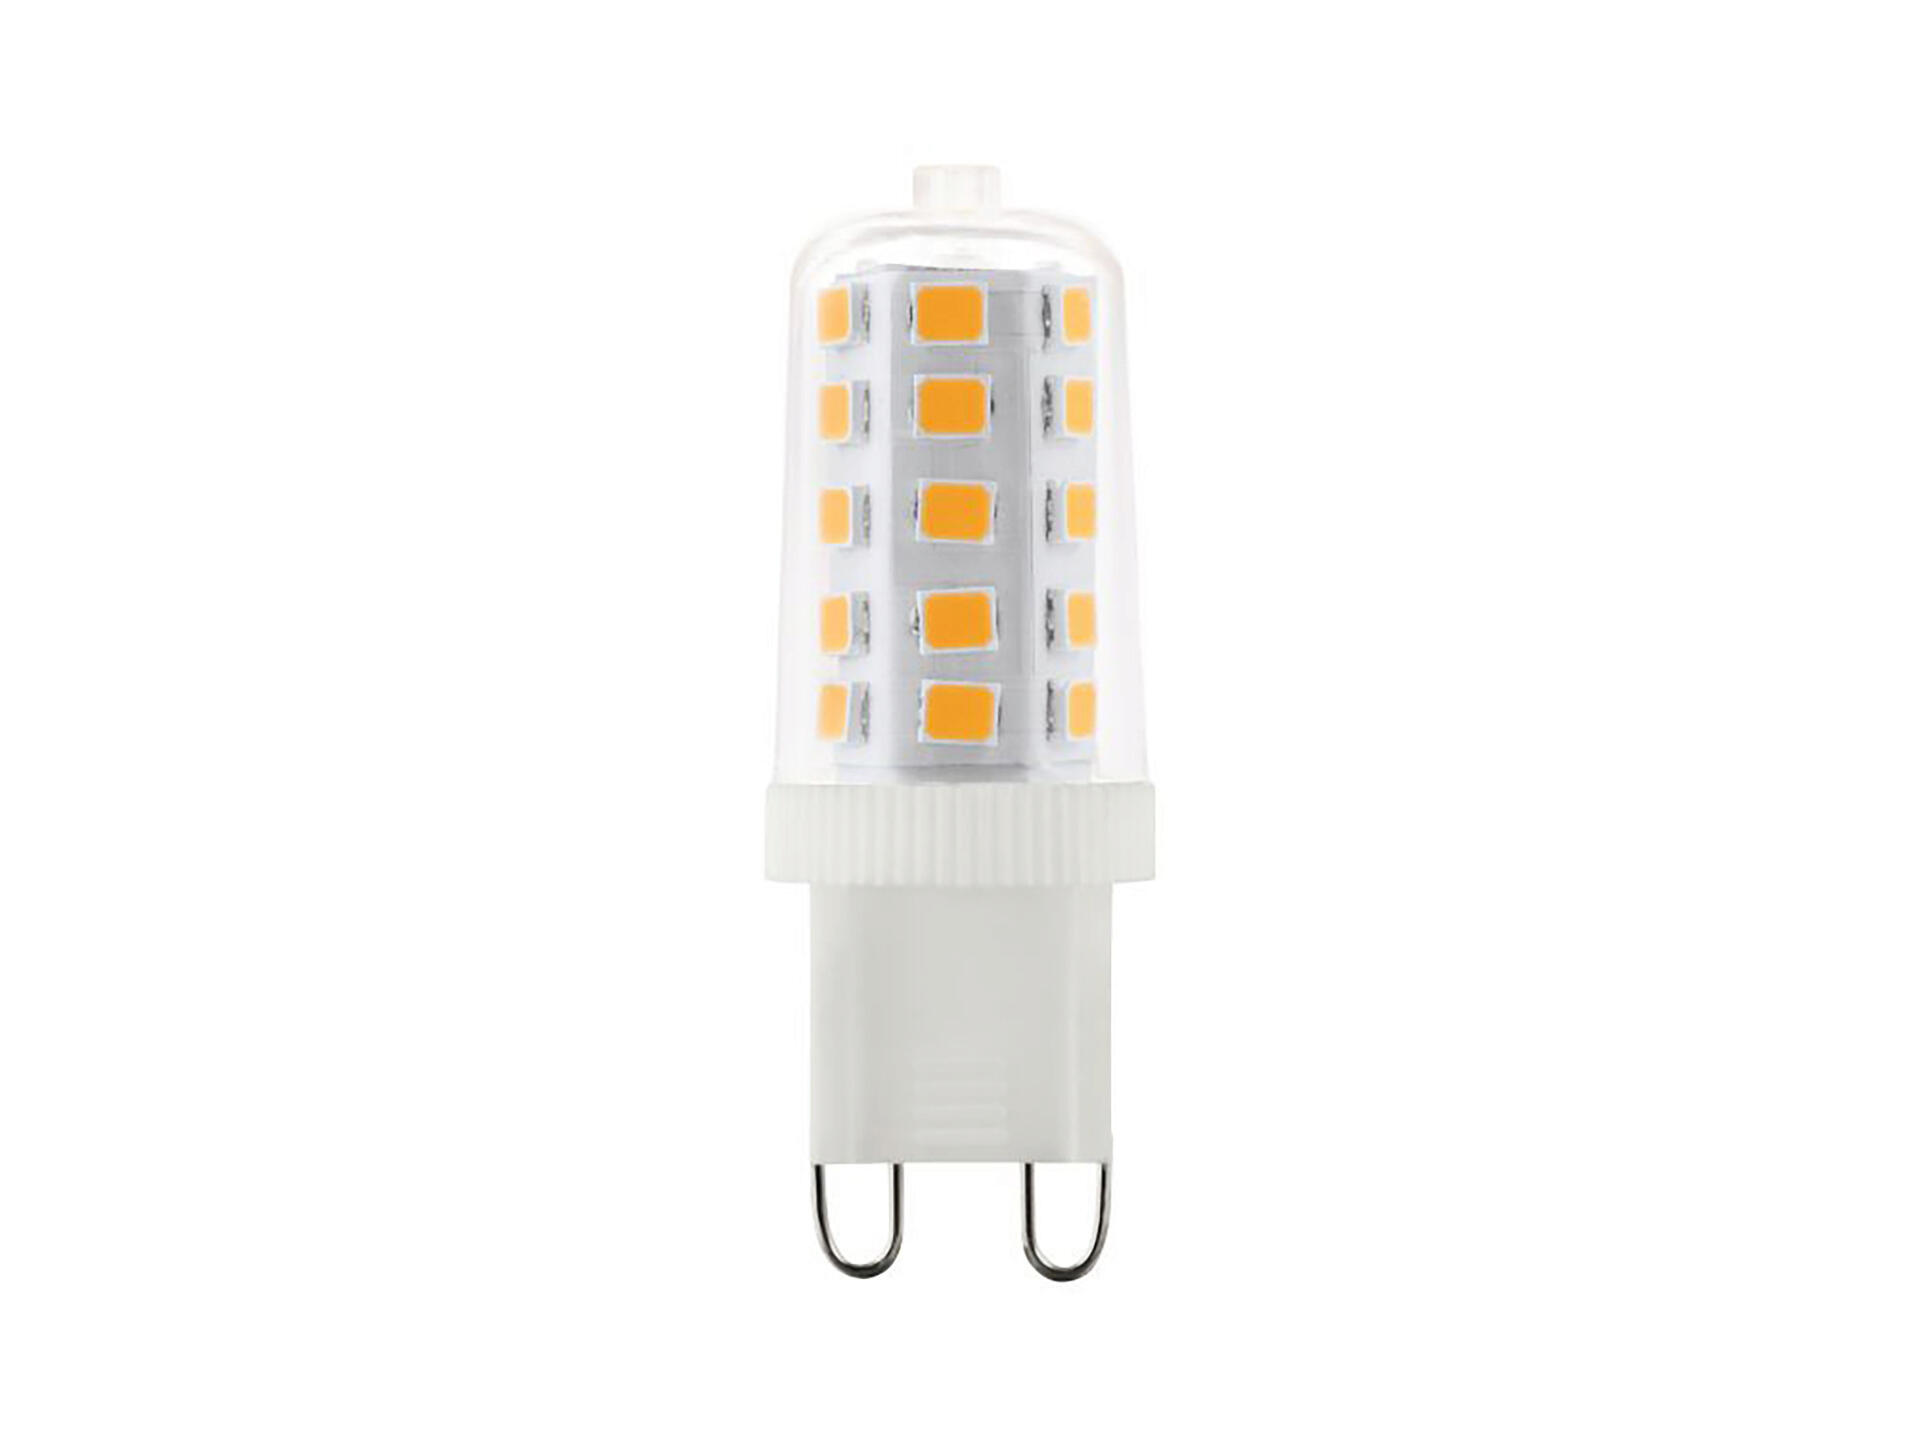 Eglo ampoule LED capsule G9 3W blanc chaud dimmable